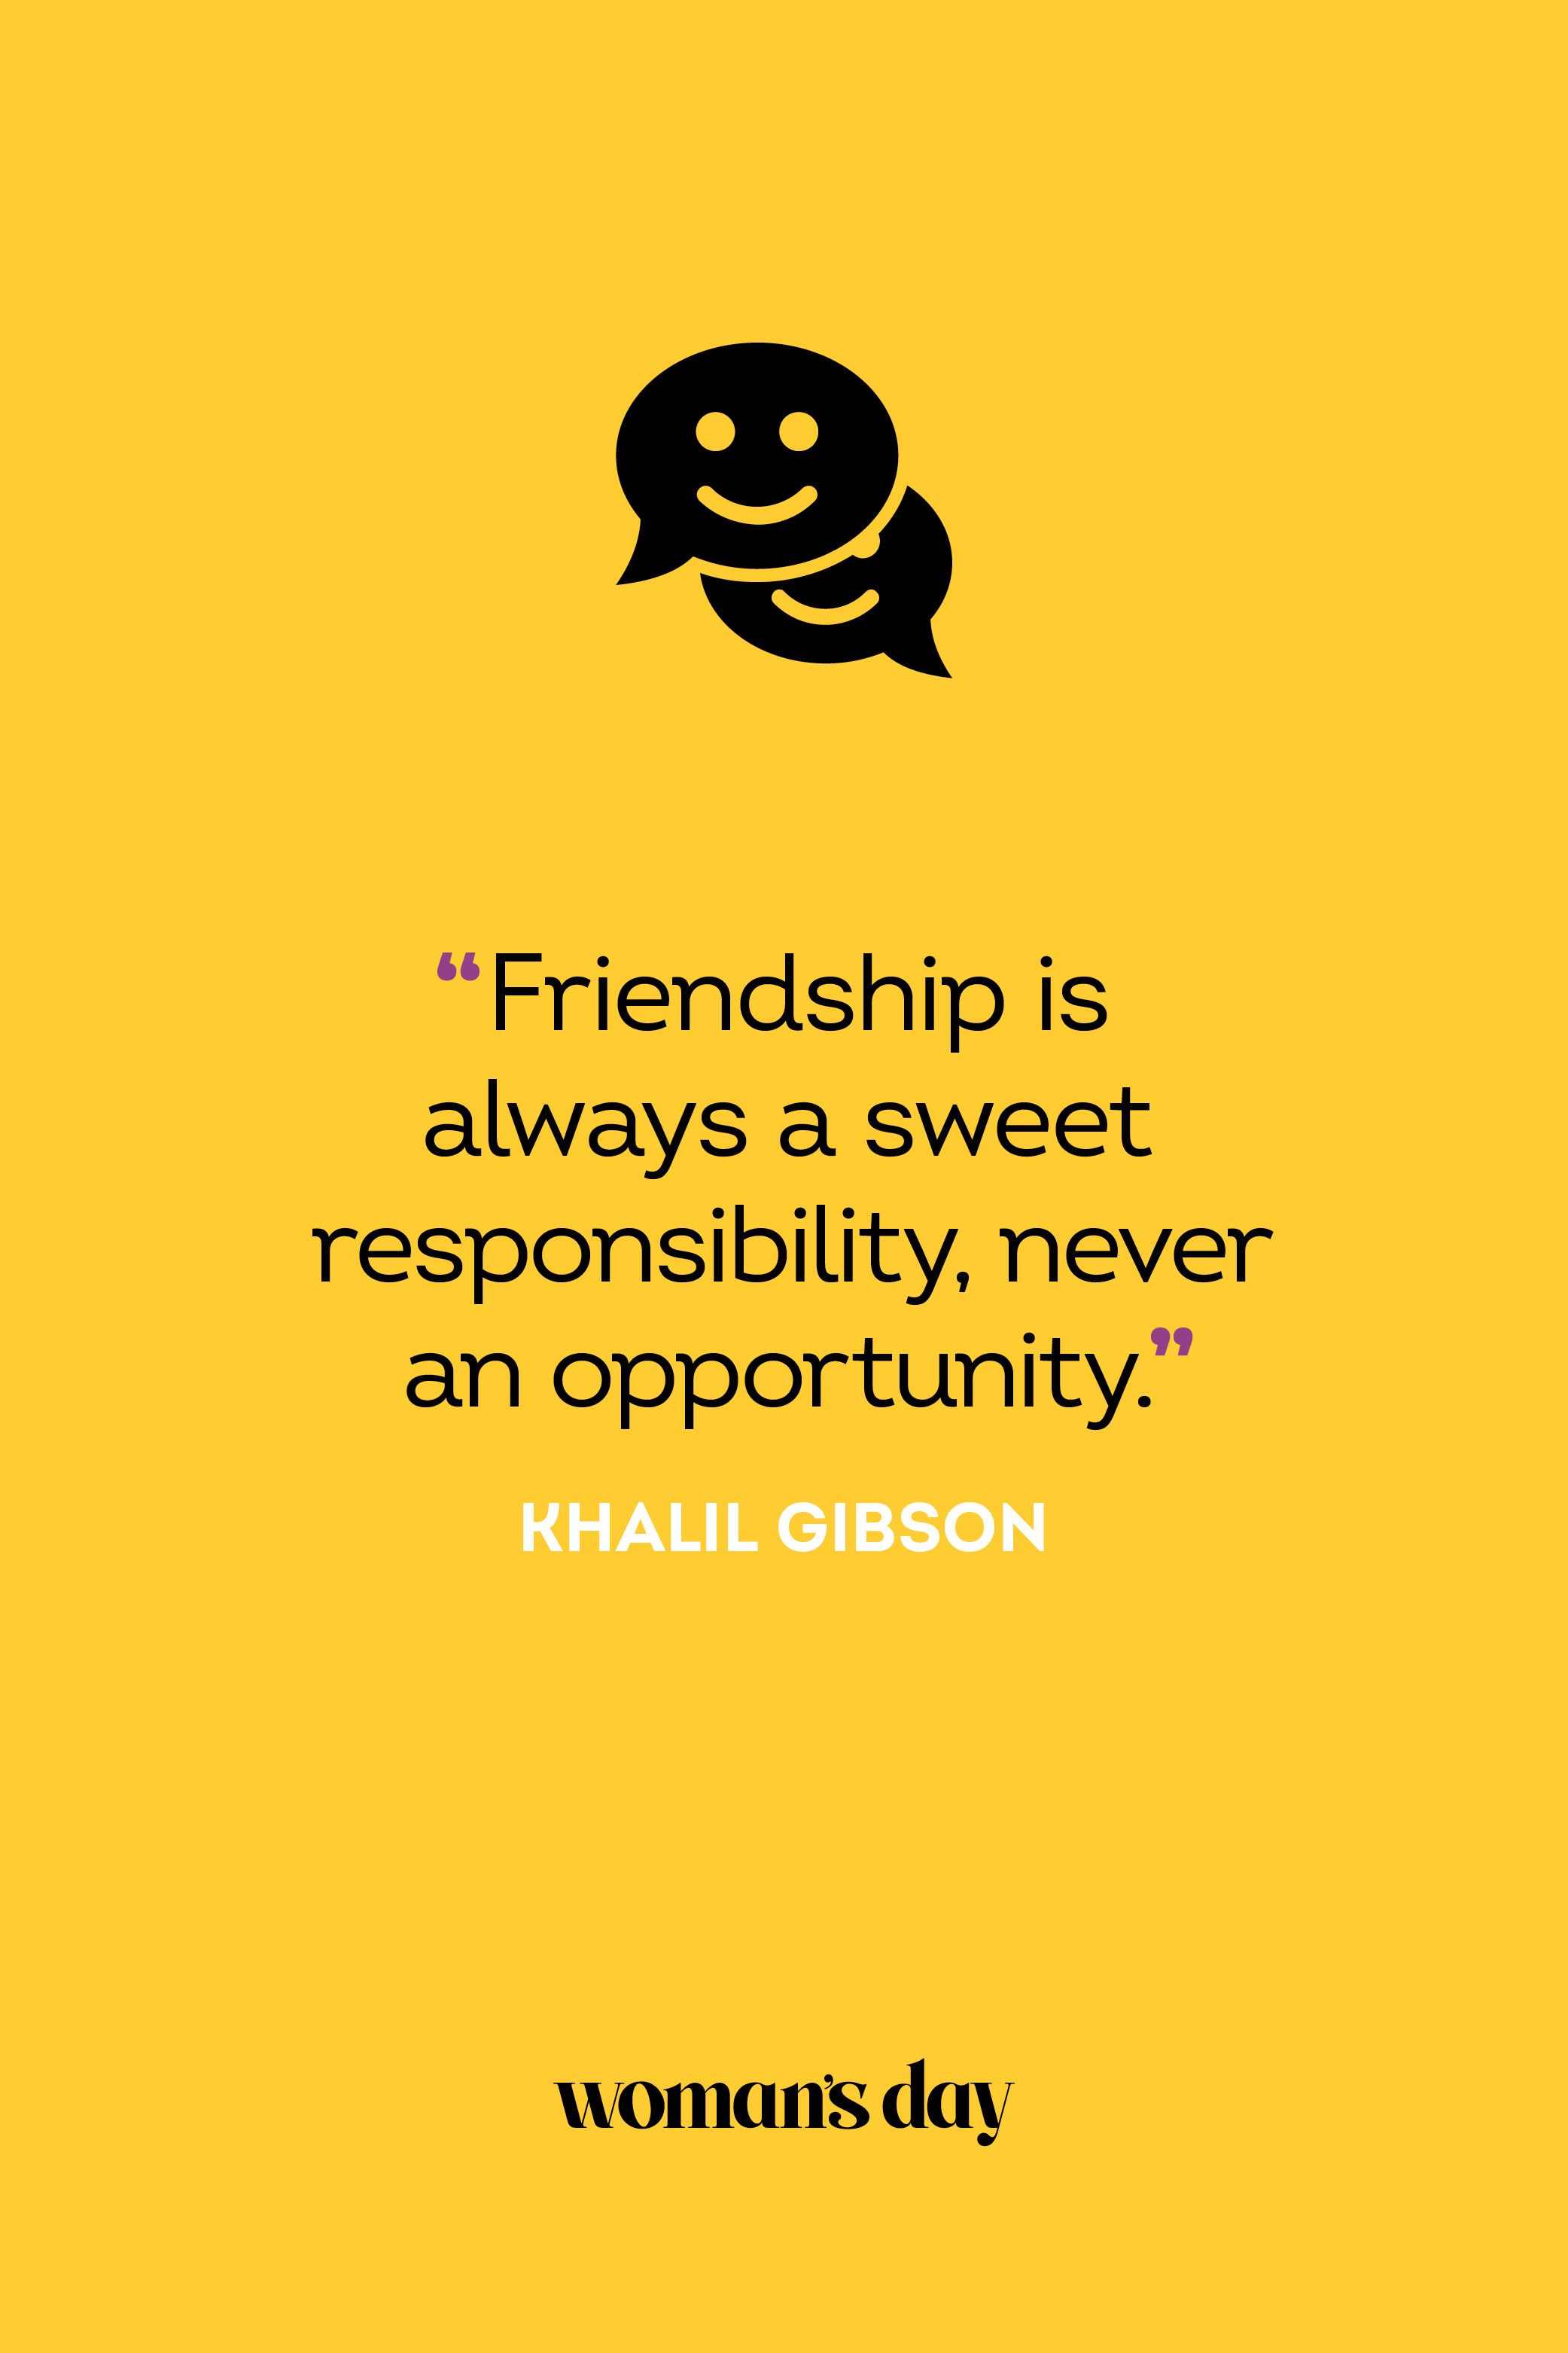 nice words about friendship